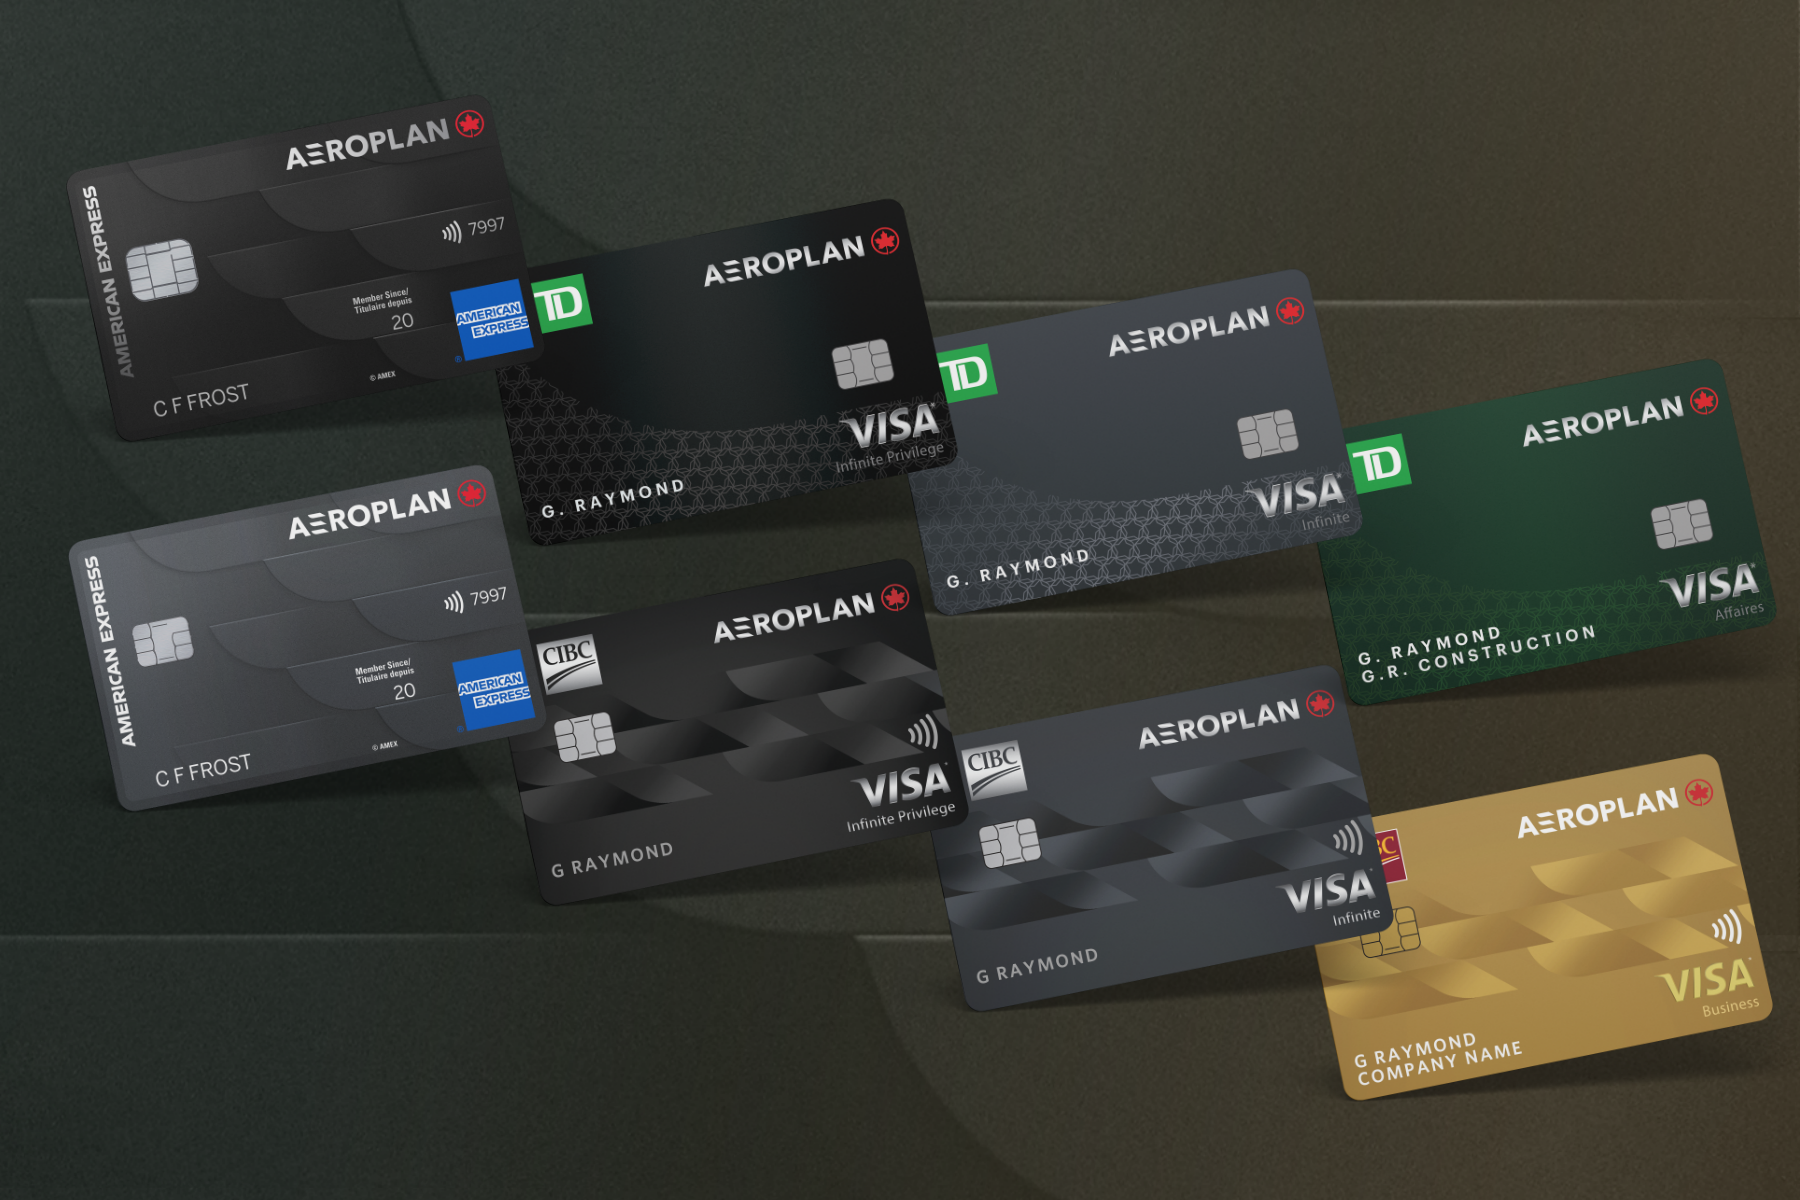 aeroplan cards lined up in two rows